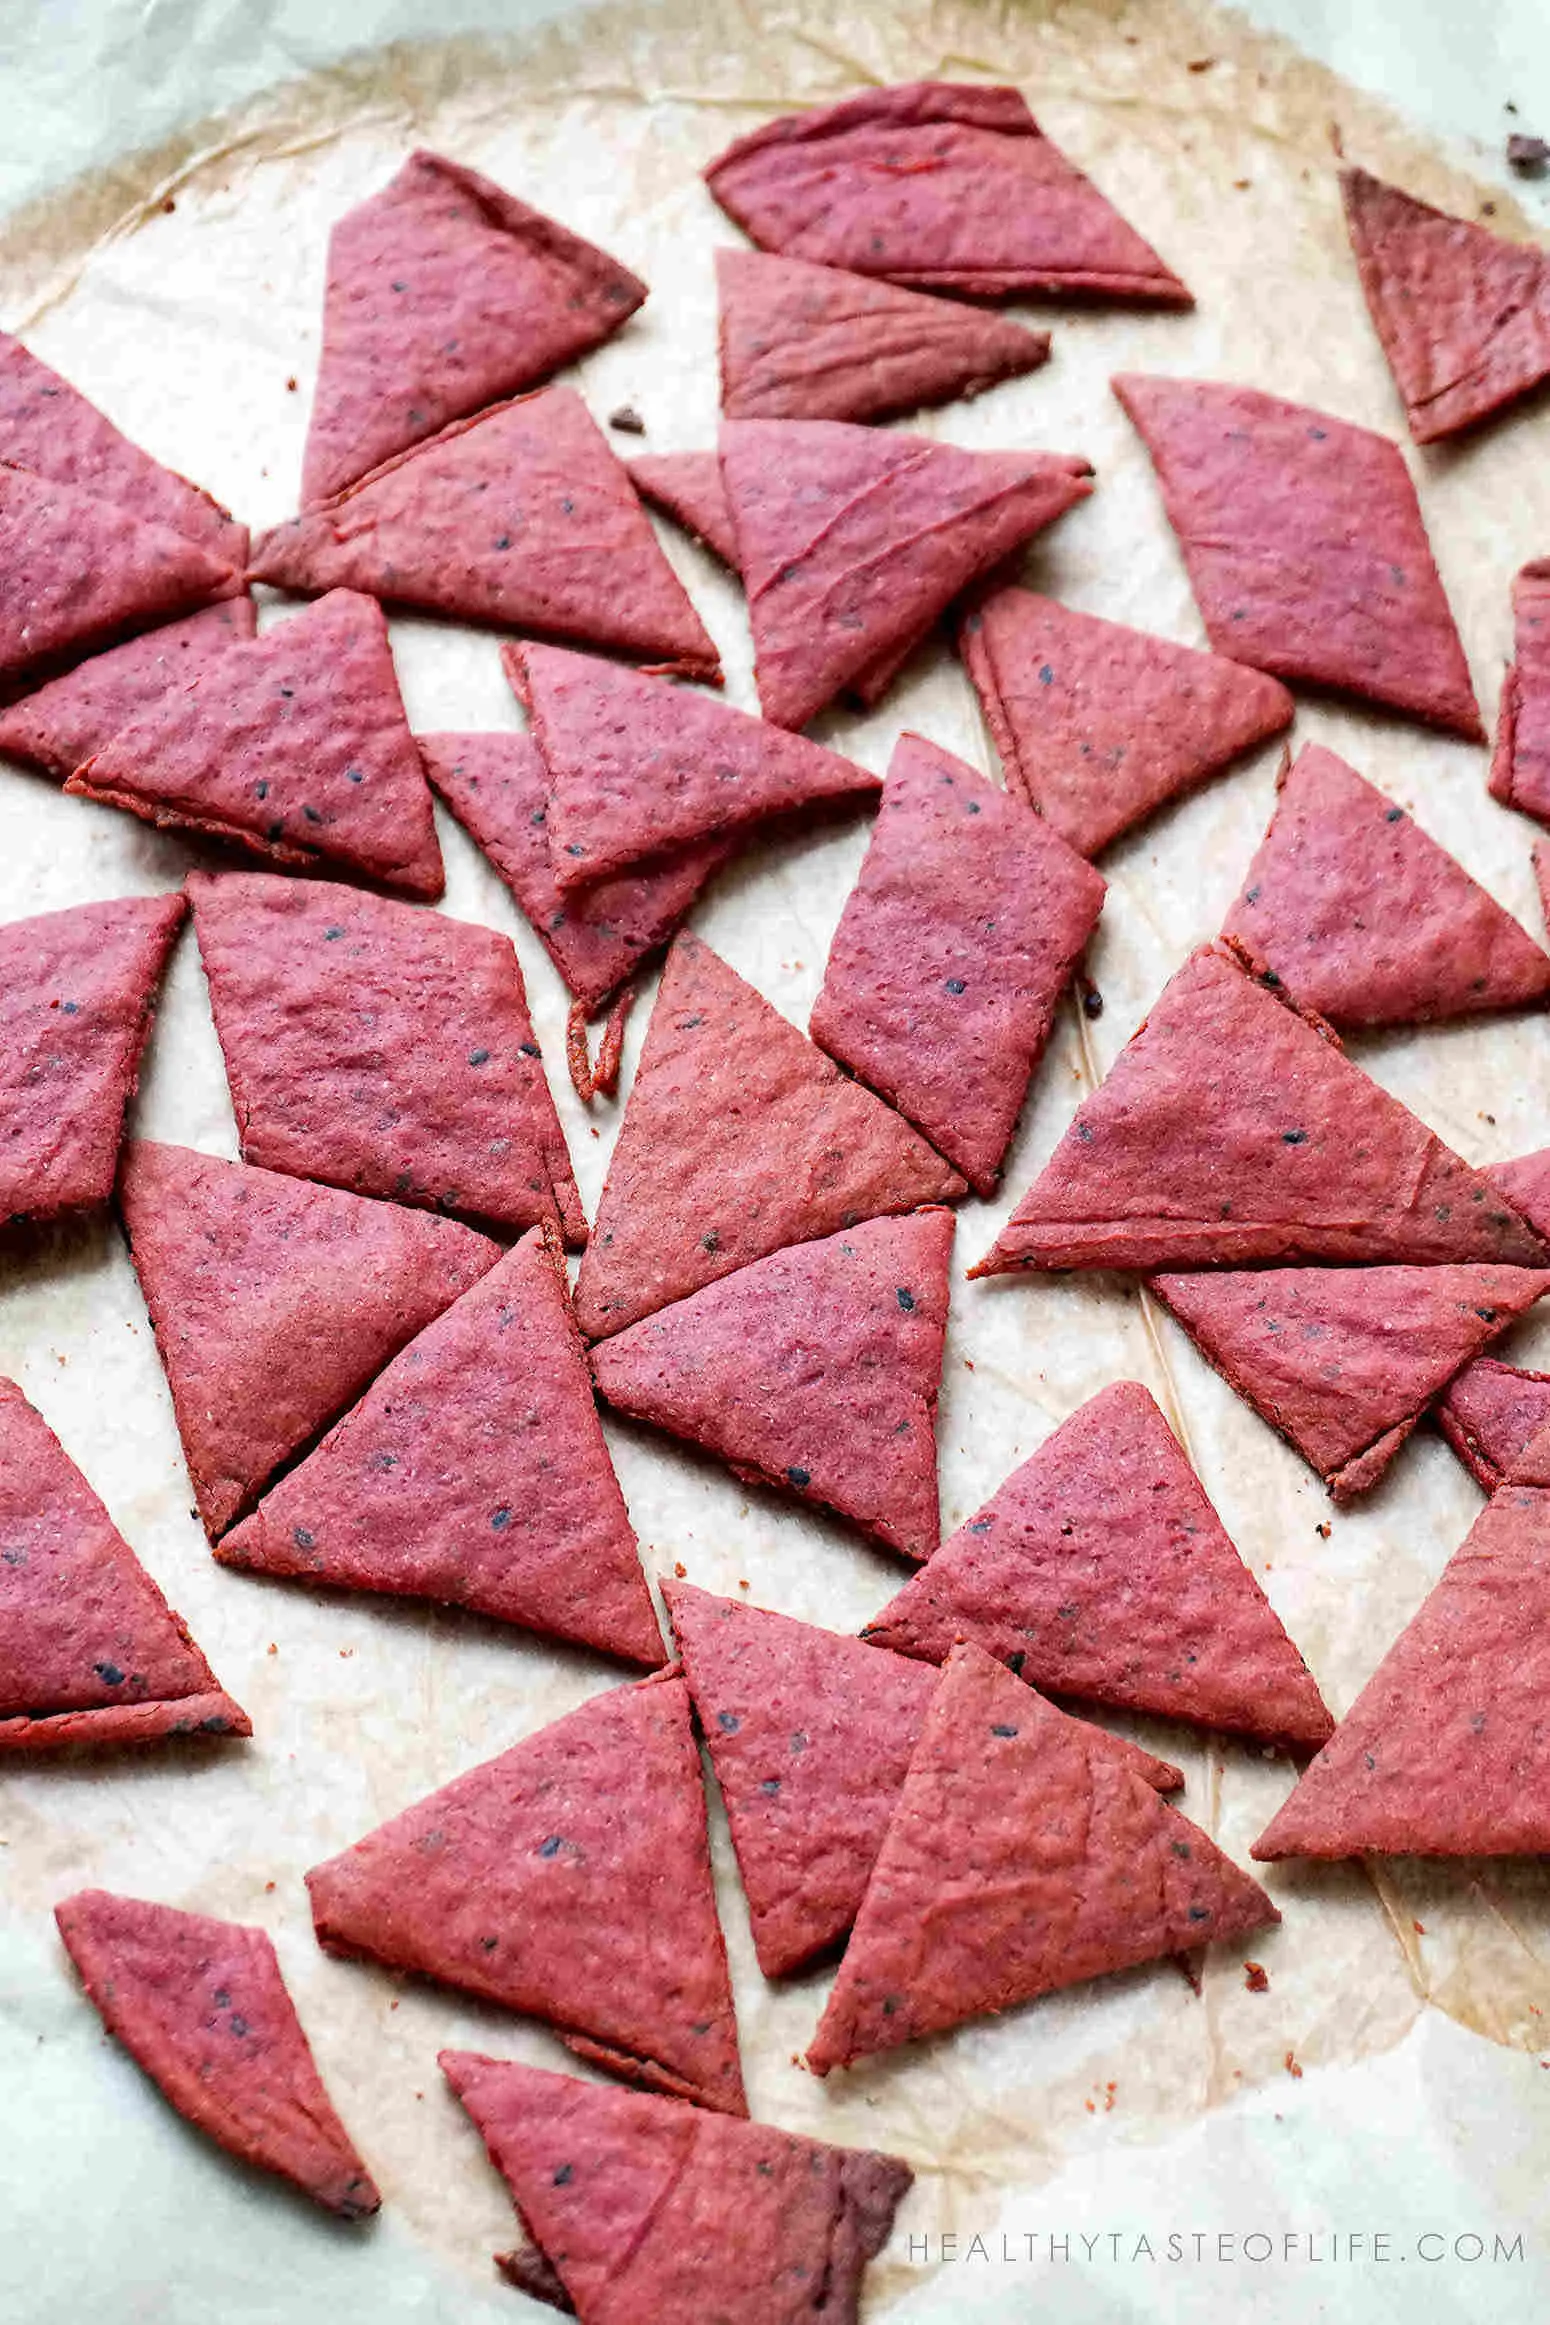 beet crackers cut into triangular pieces